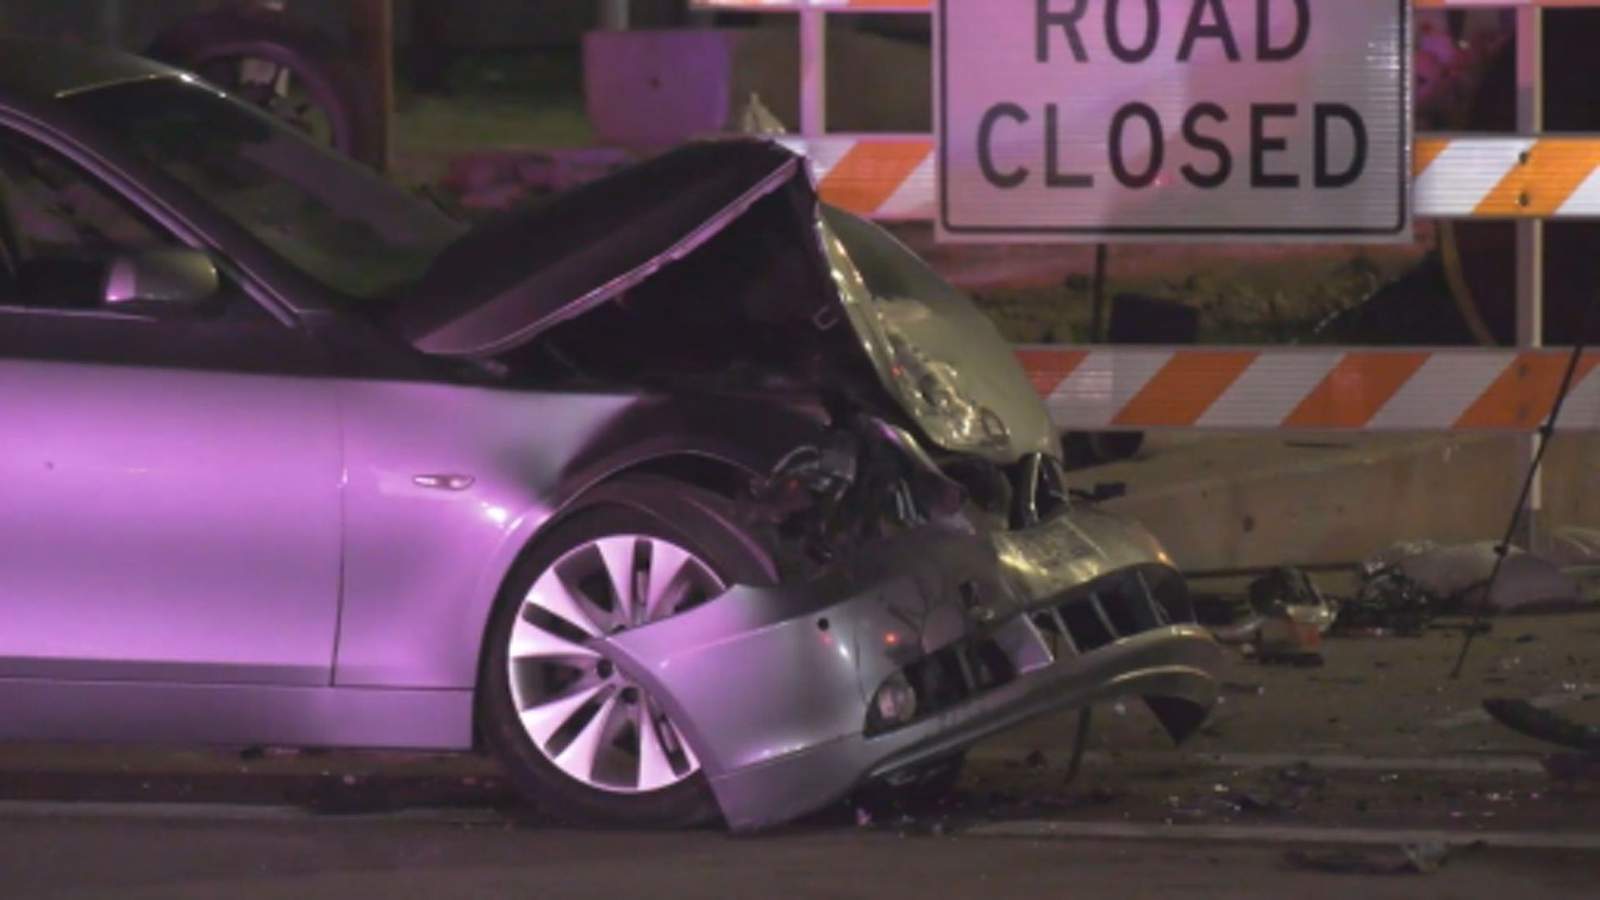 Child killed in two-vehicle crash involving suspected DWI driver, Houston police say